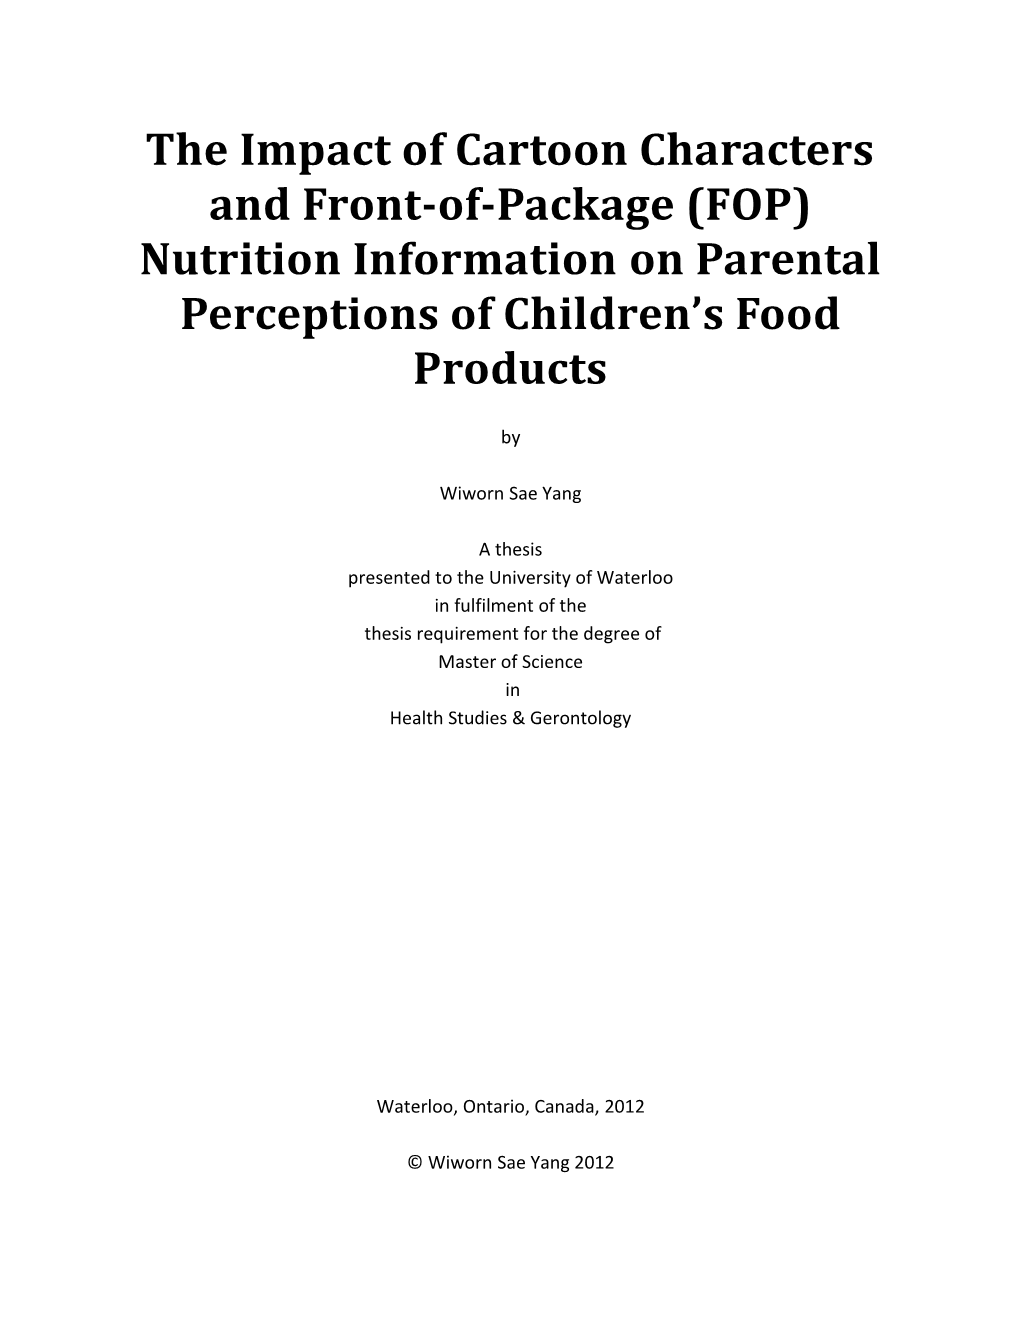 The Impact of Cartoon Characters and Front-Of-Package (FOP) Nutrition Information on Parental Perceptions of Children’S Food